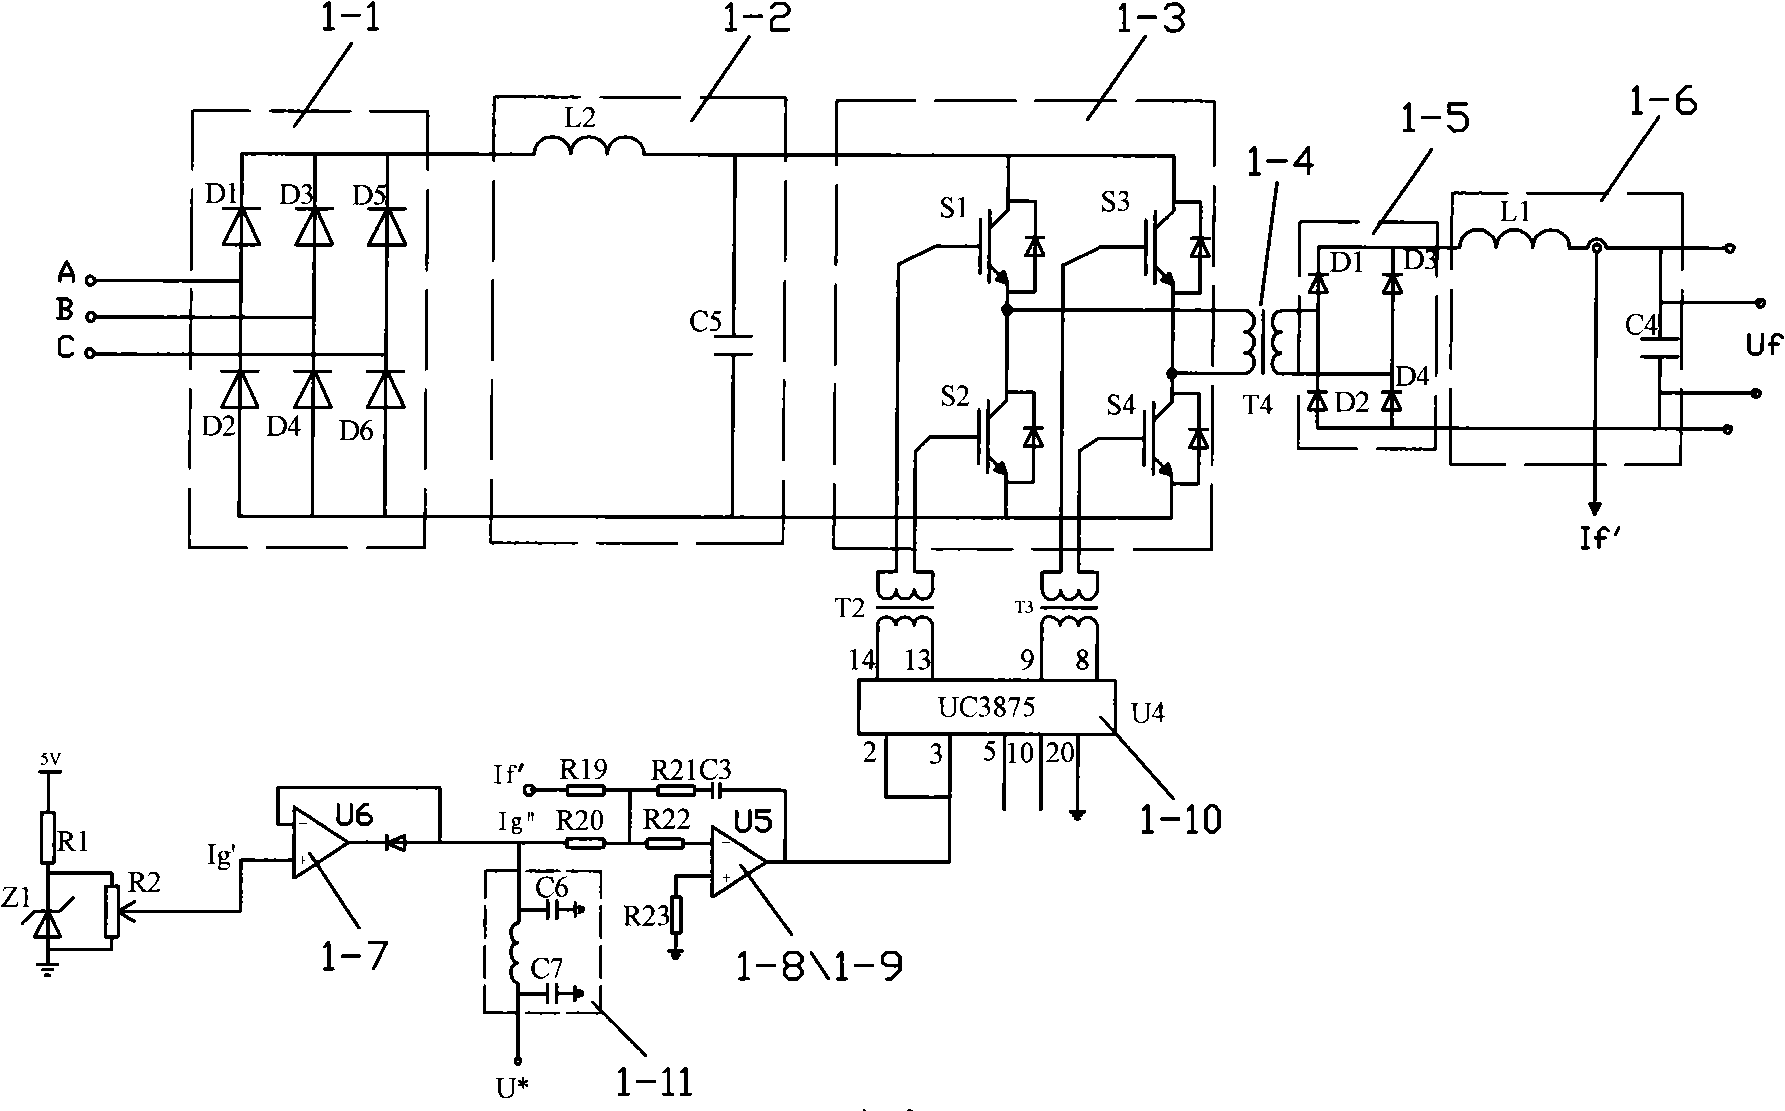 Modular parallel great power DC power source switch apparatus